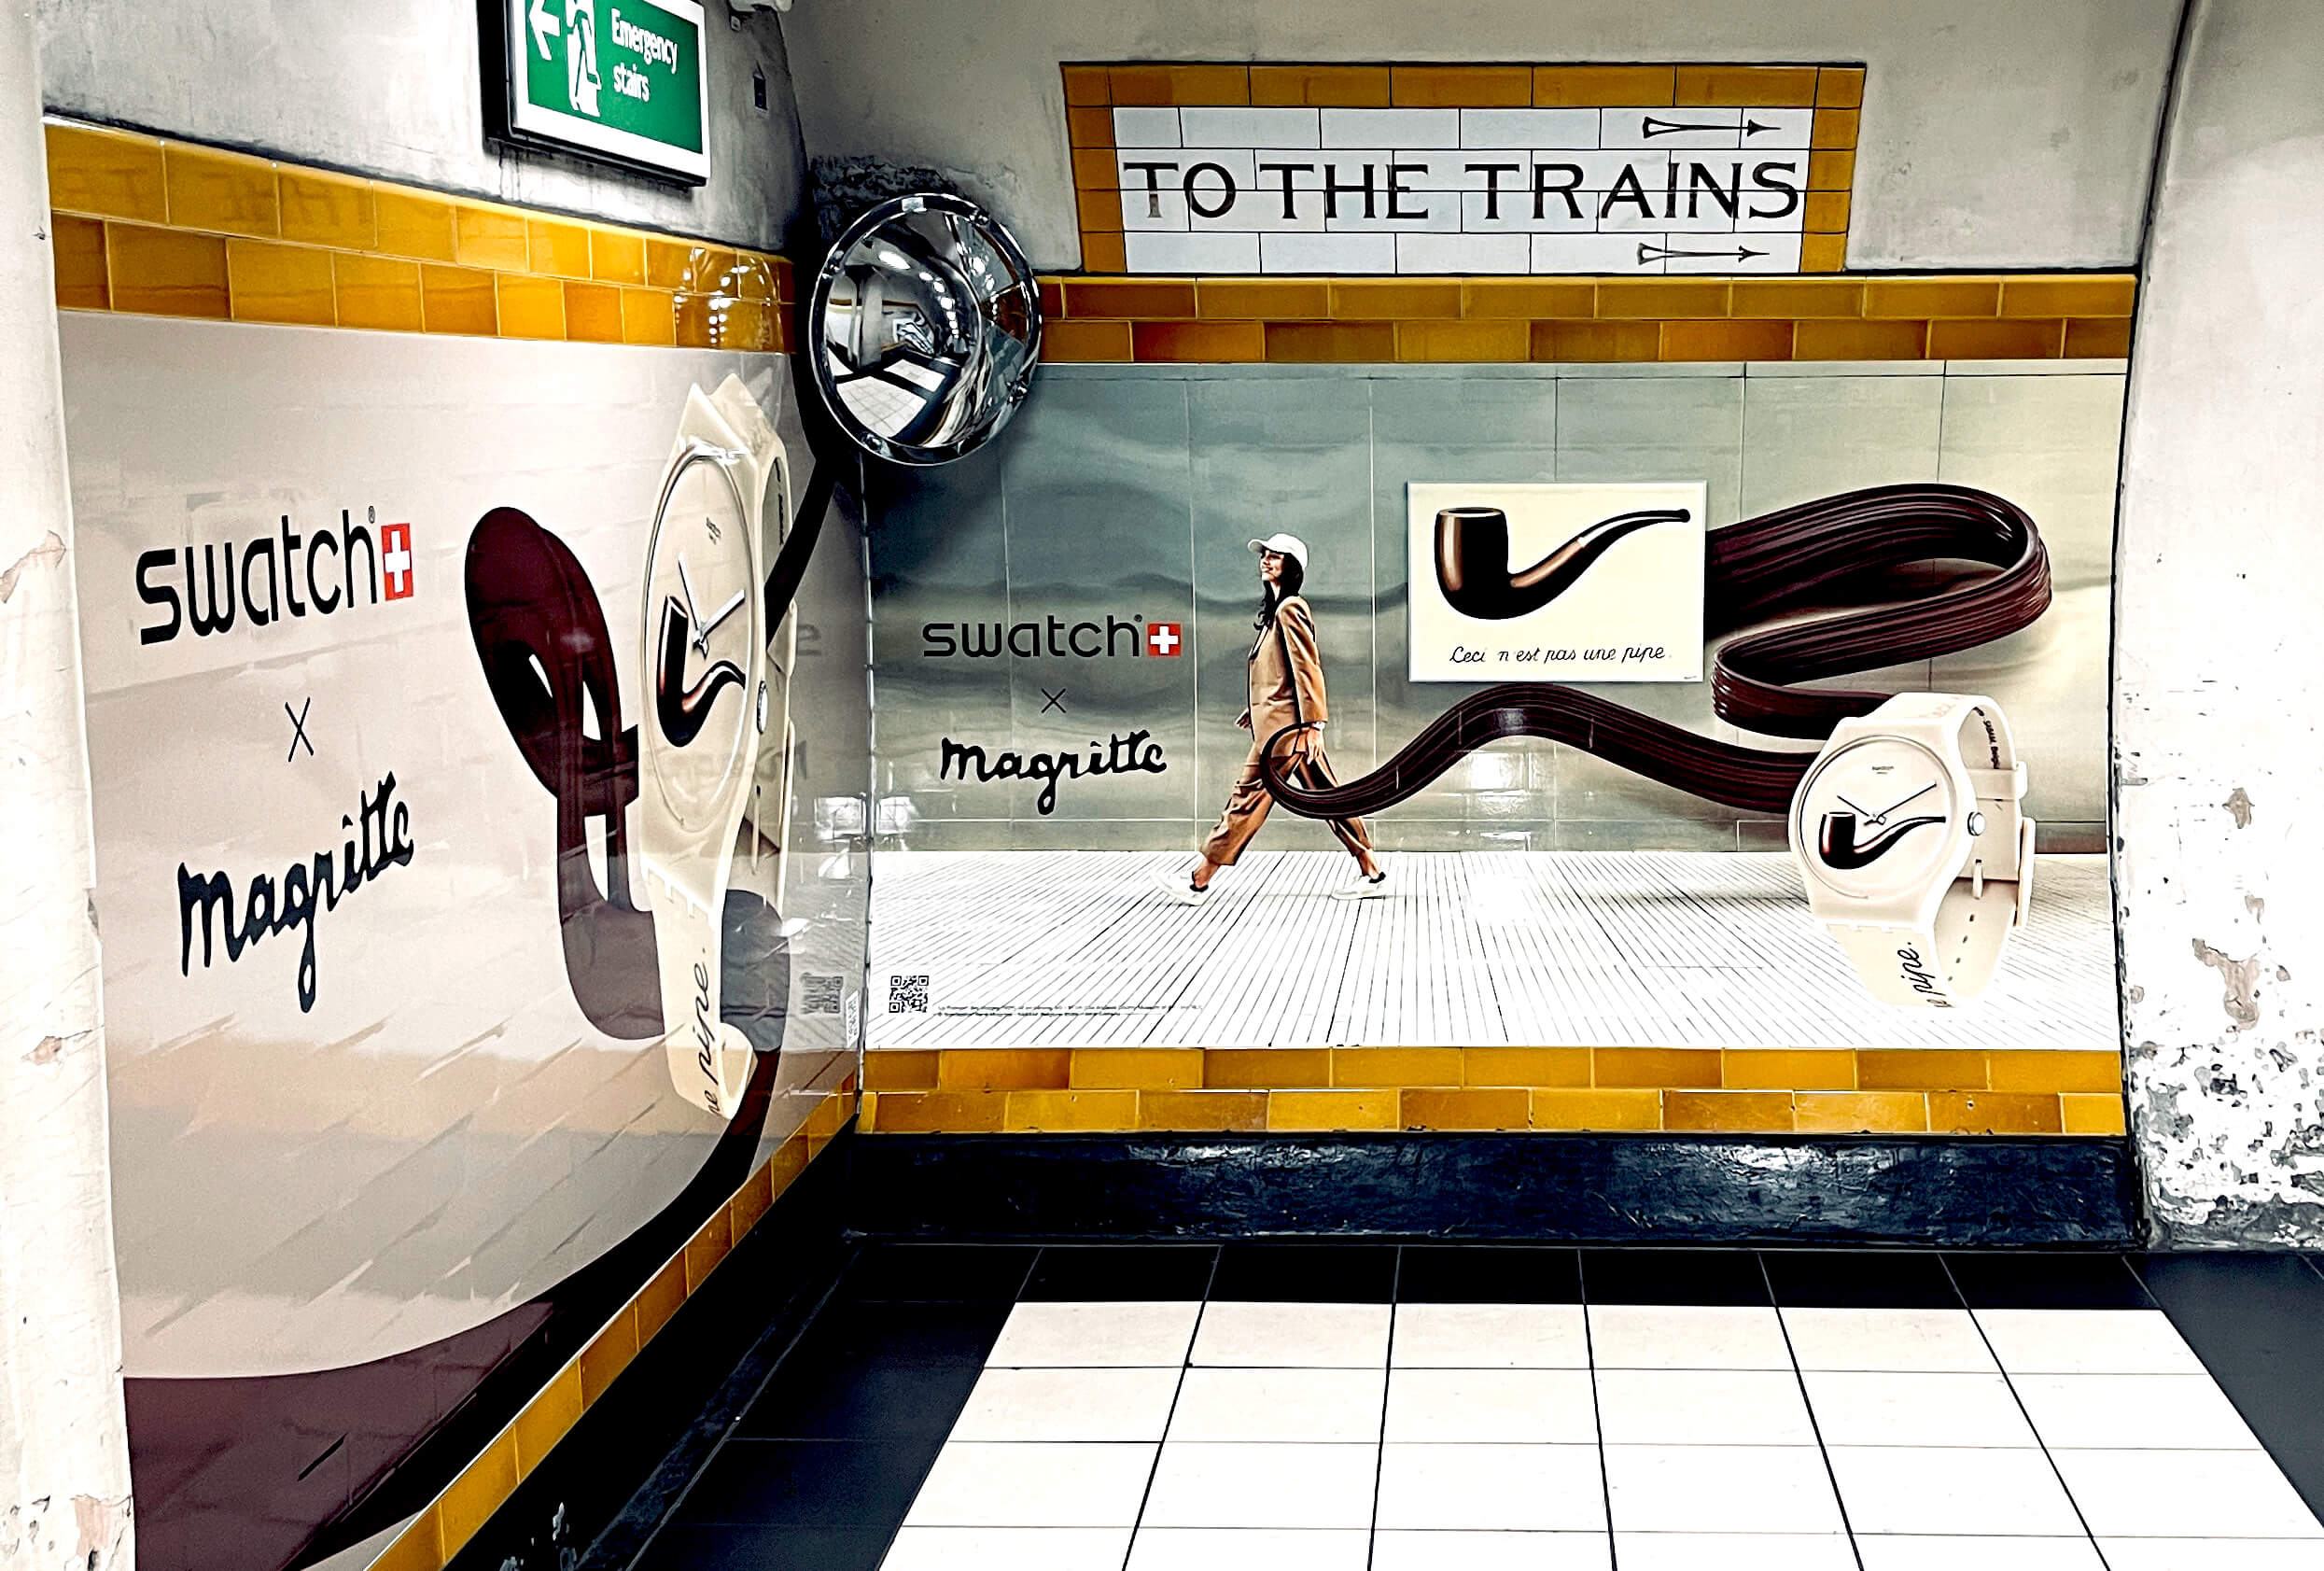 Swatch x Magritte advert campaign takeover at Covent Garden Underground Station